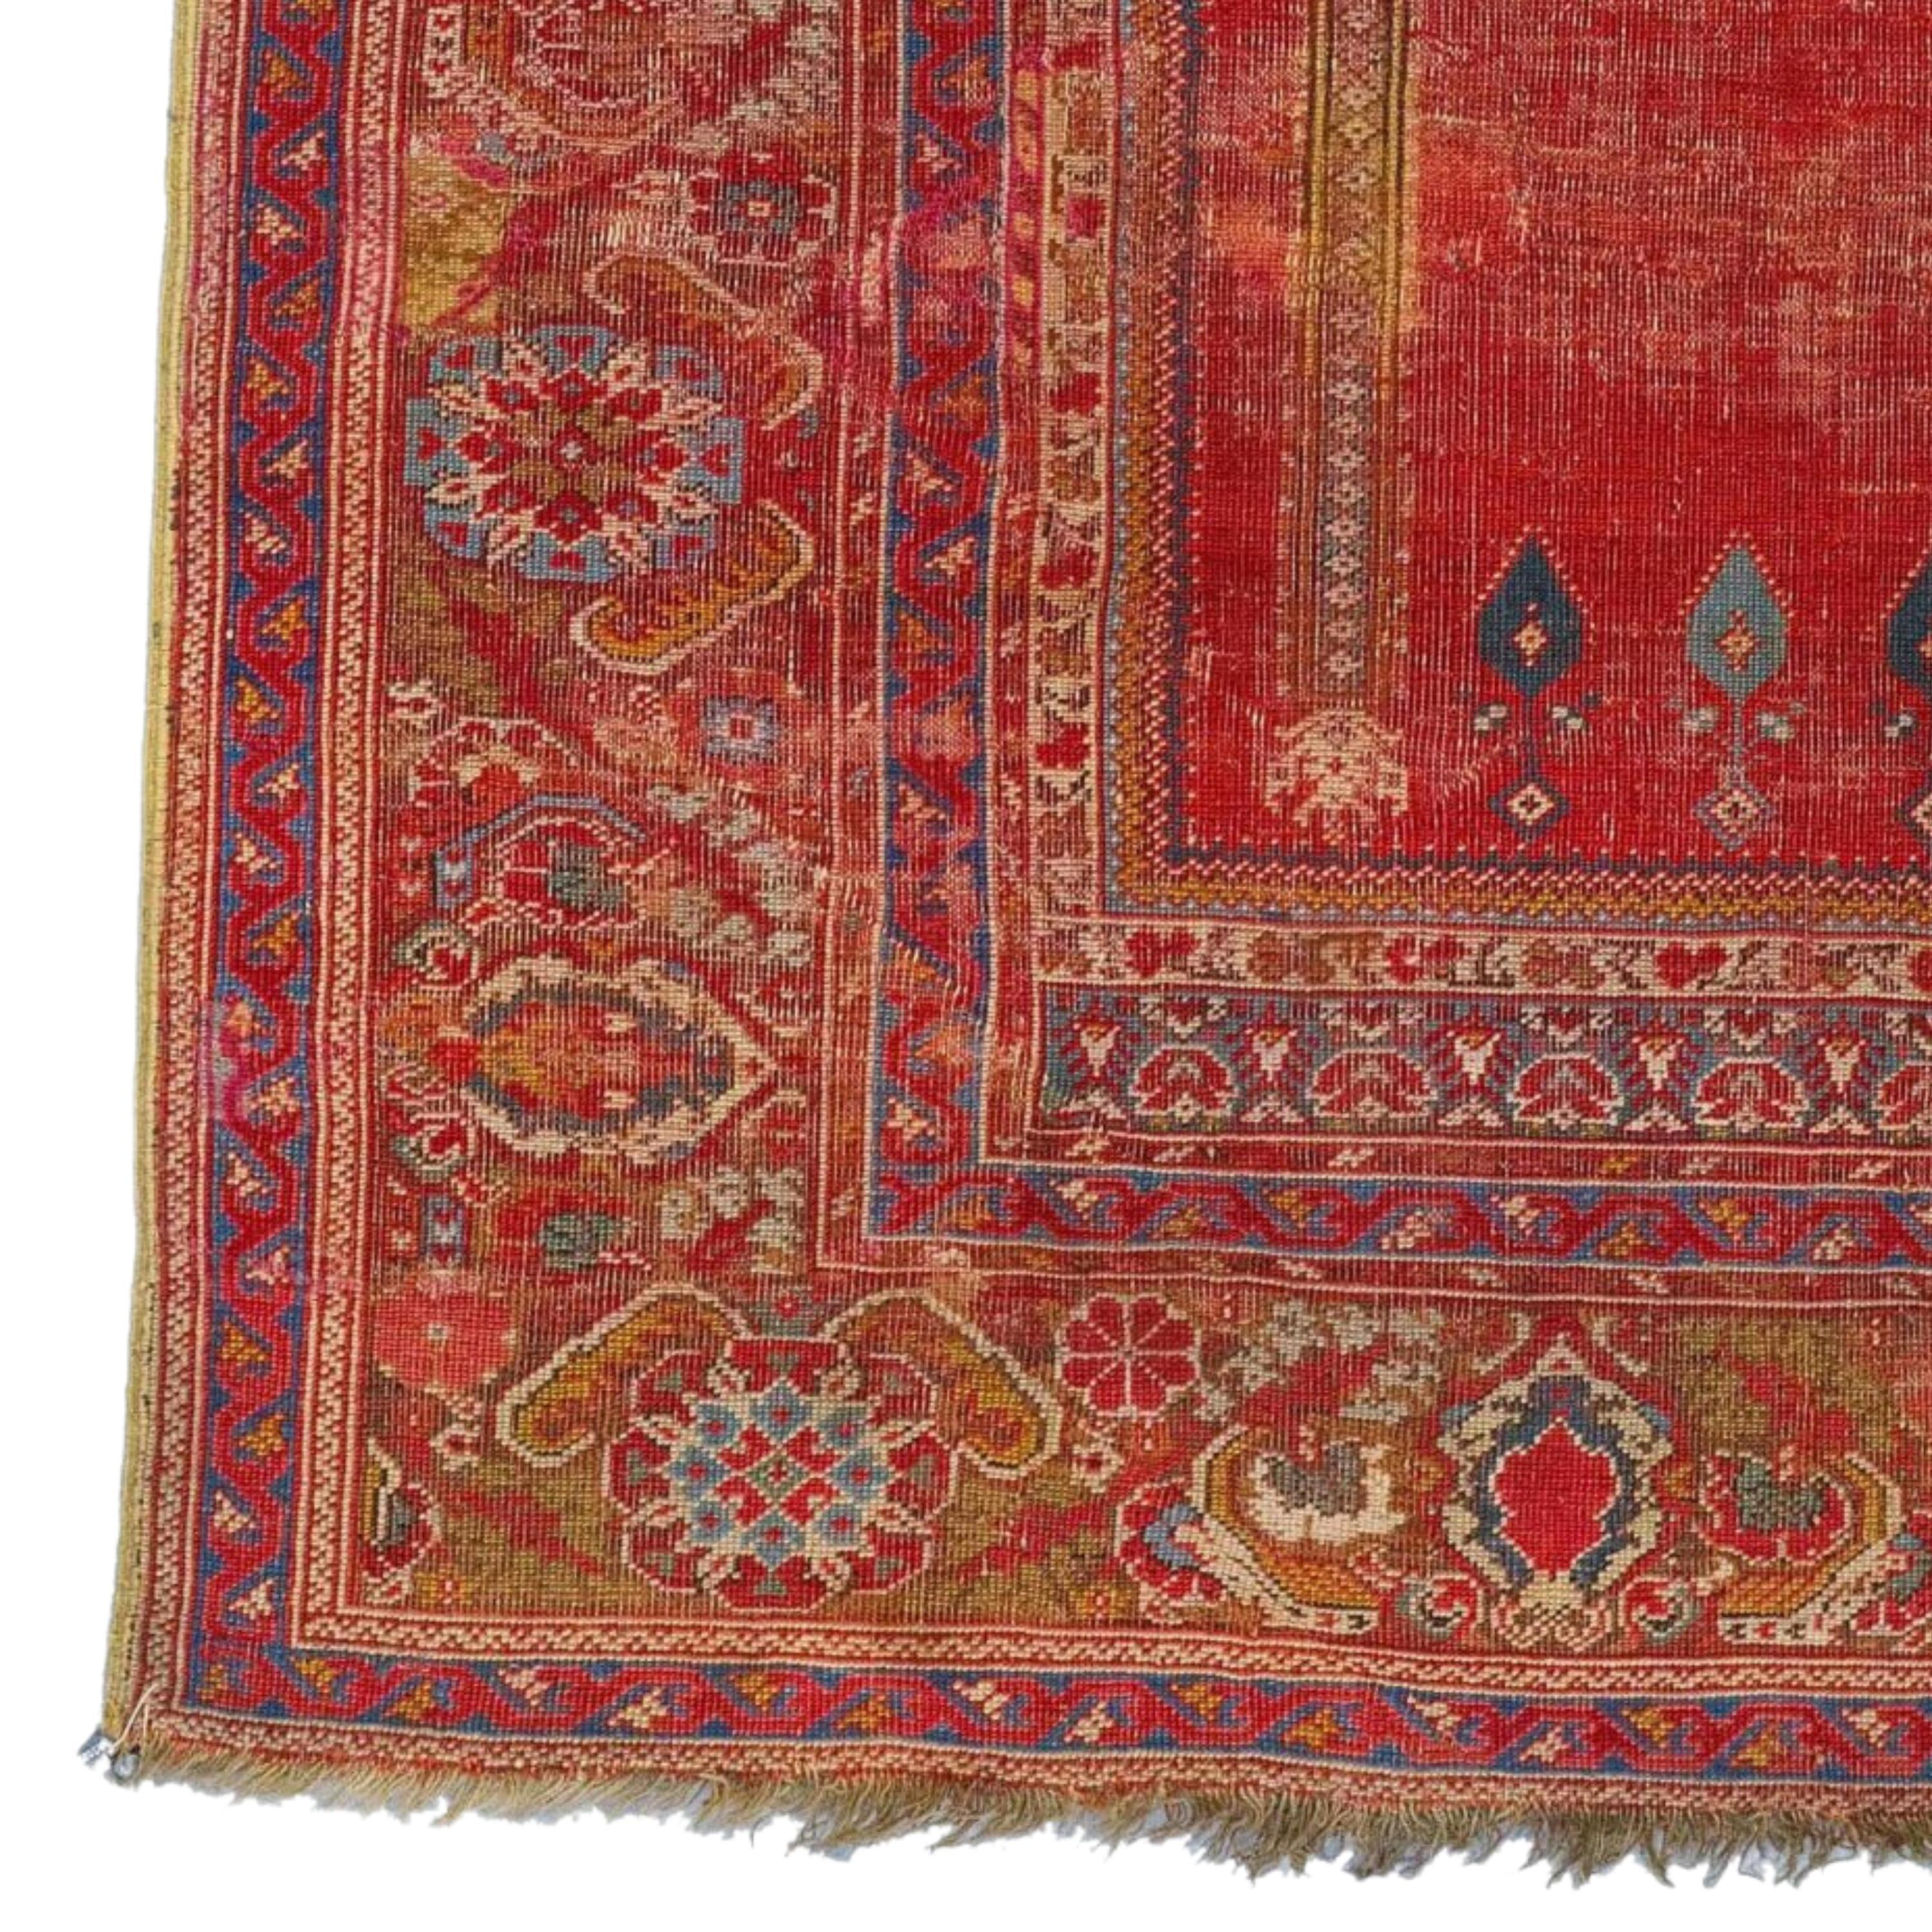 18th Century Anatolian Ghordes Rug Size 118 x 165 cm (3,87 x 5,41 ft)

With ‘floating’ columns and an enlarged ‘mosque lamp’ motif dominating the red field of the mihrab, this so-called ‘Basra Ghiordes ‘ prayer rug belongs to a subgroup of 18th